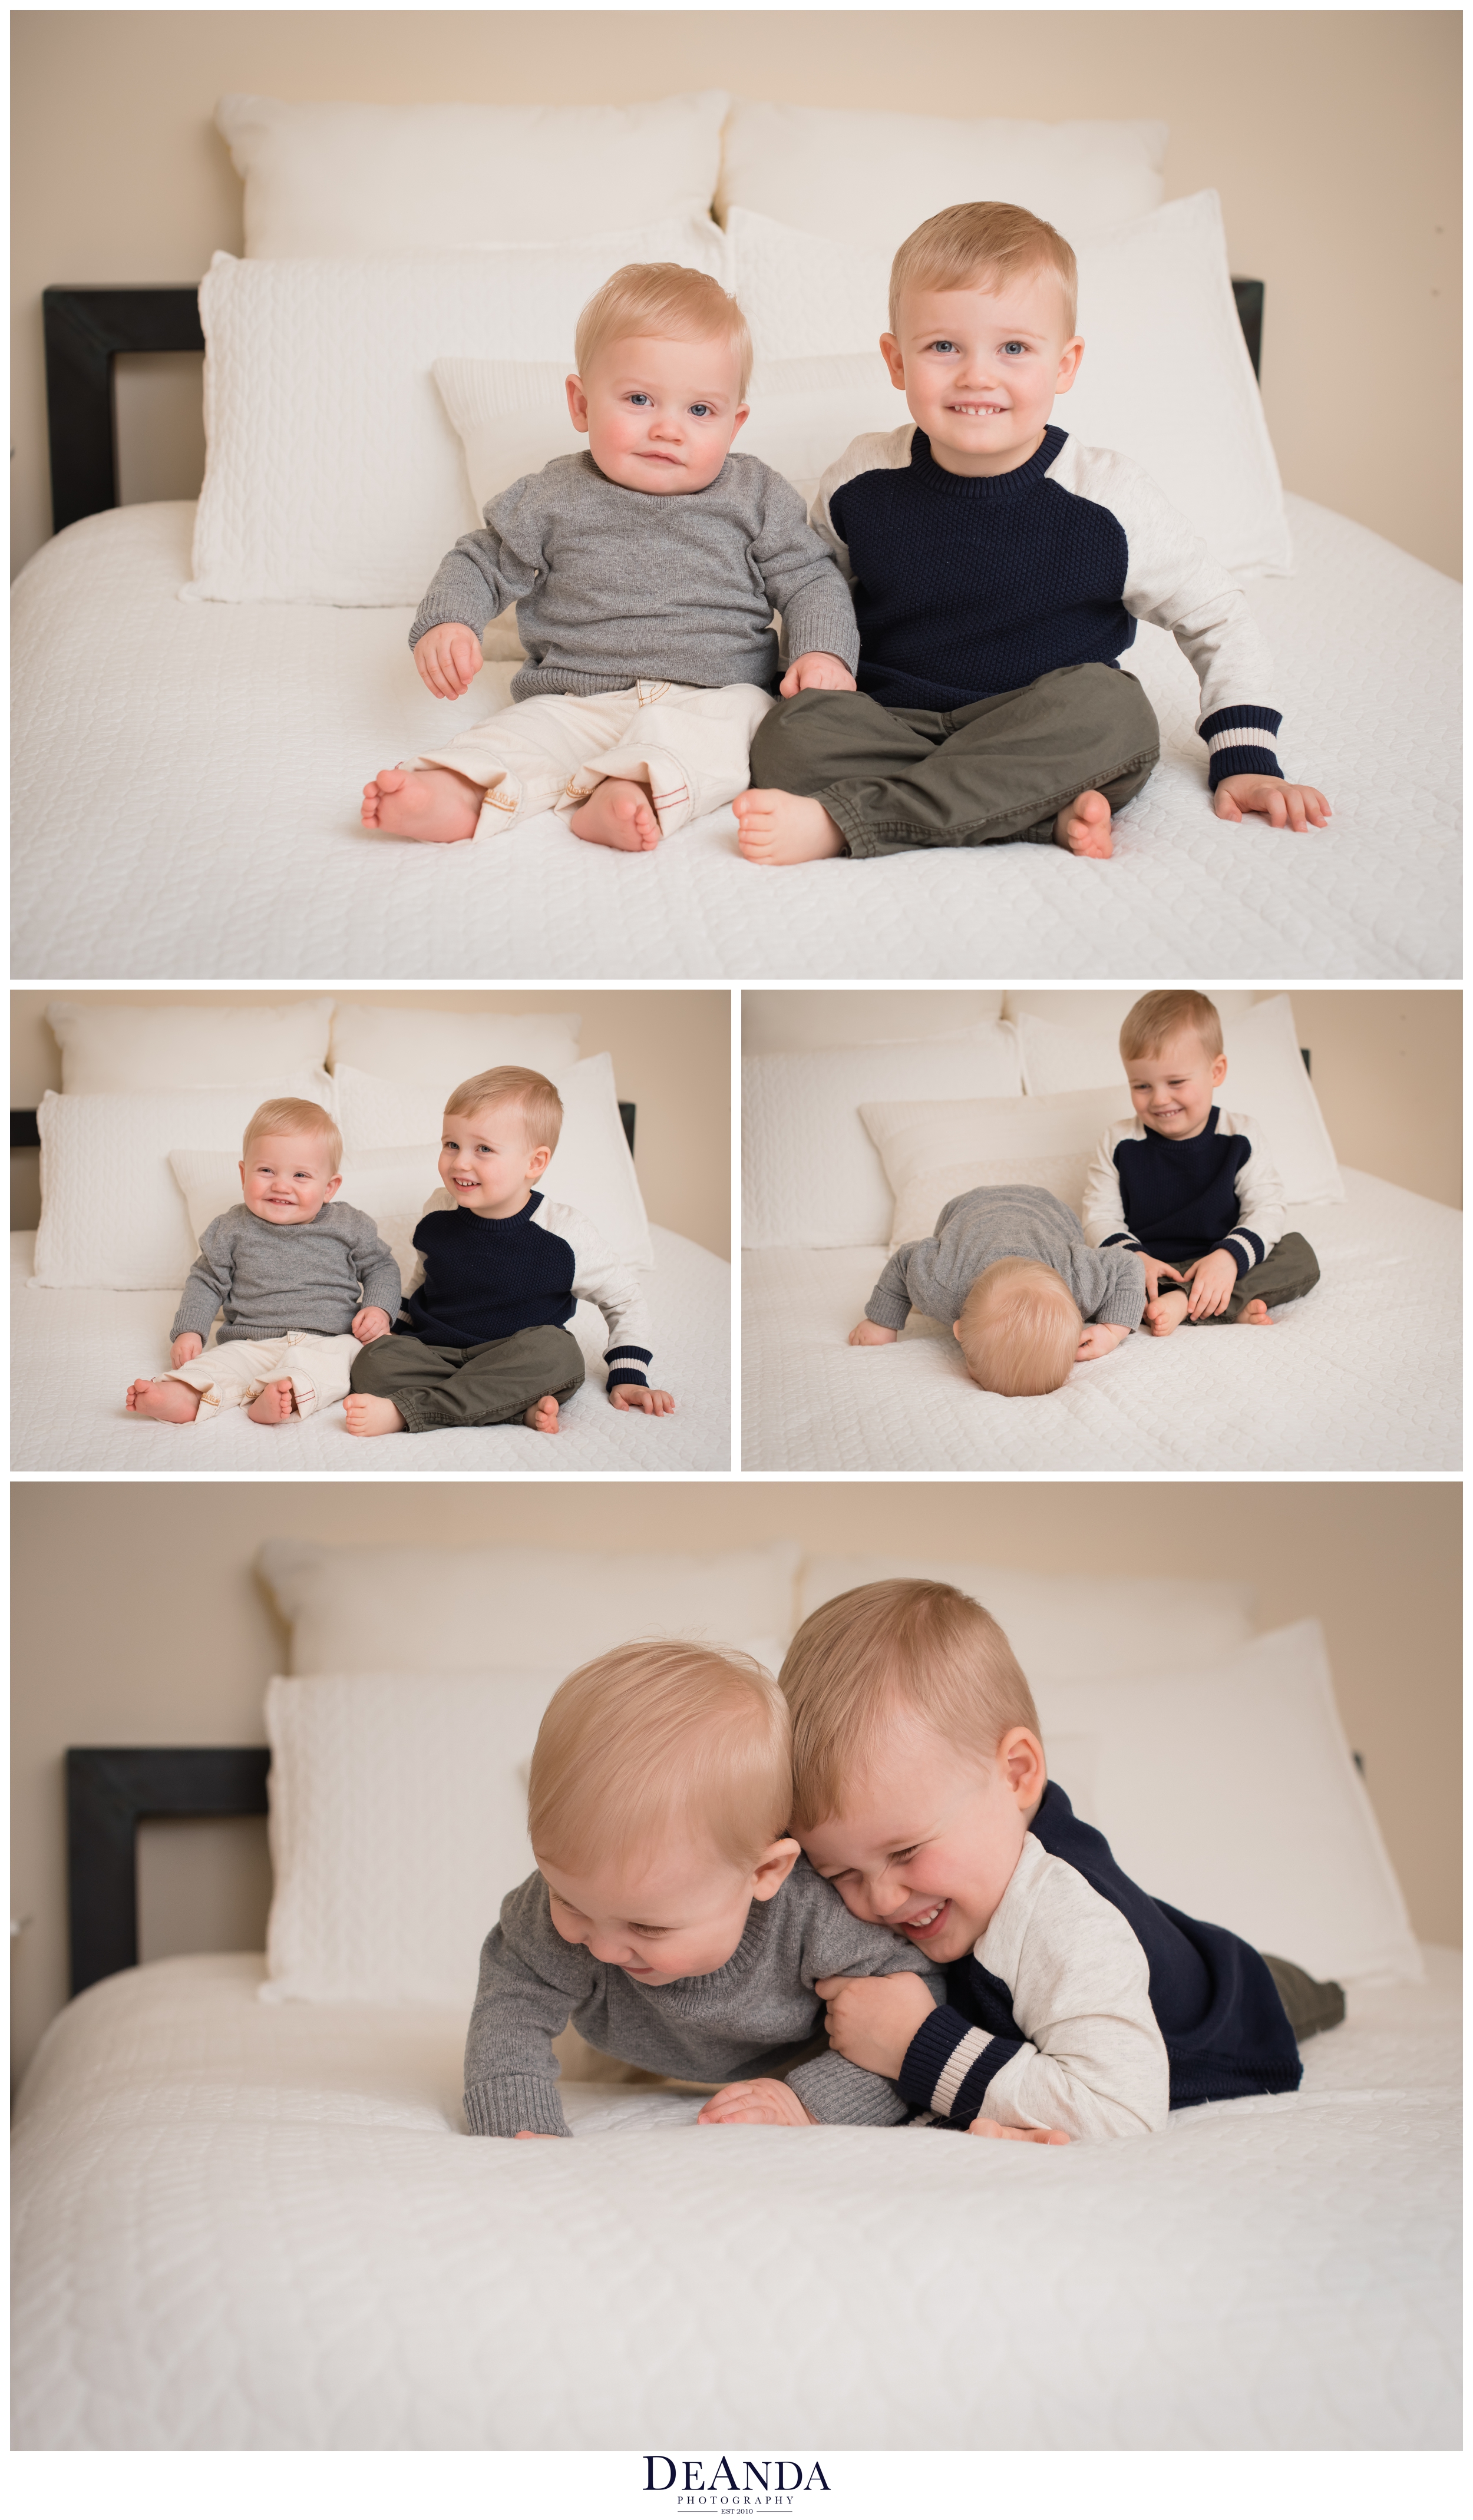 1 year old lifestyle portraits in home with brother